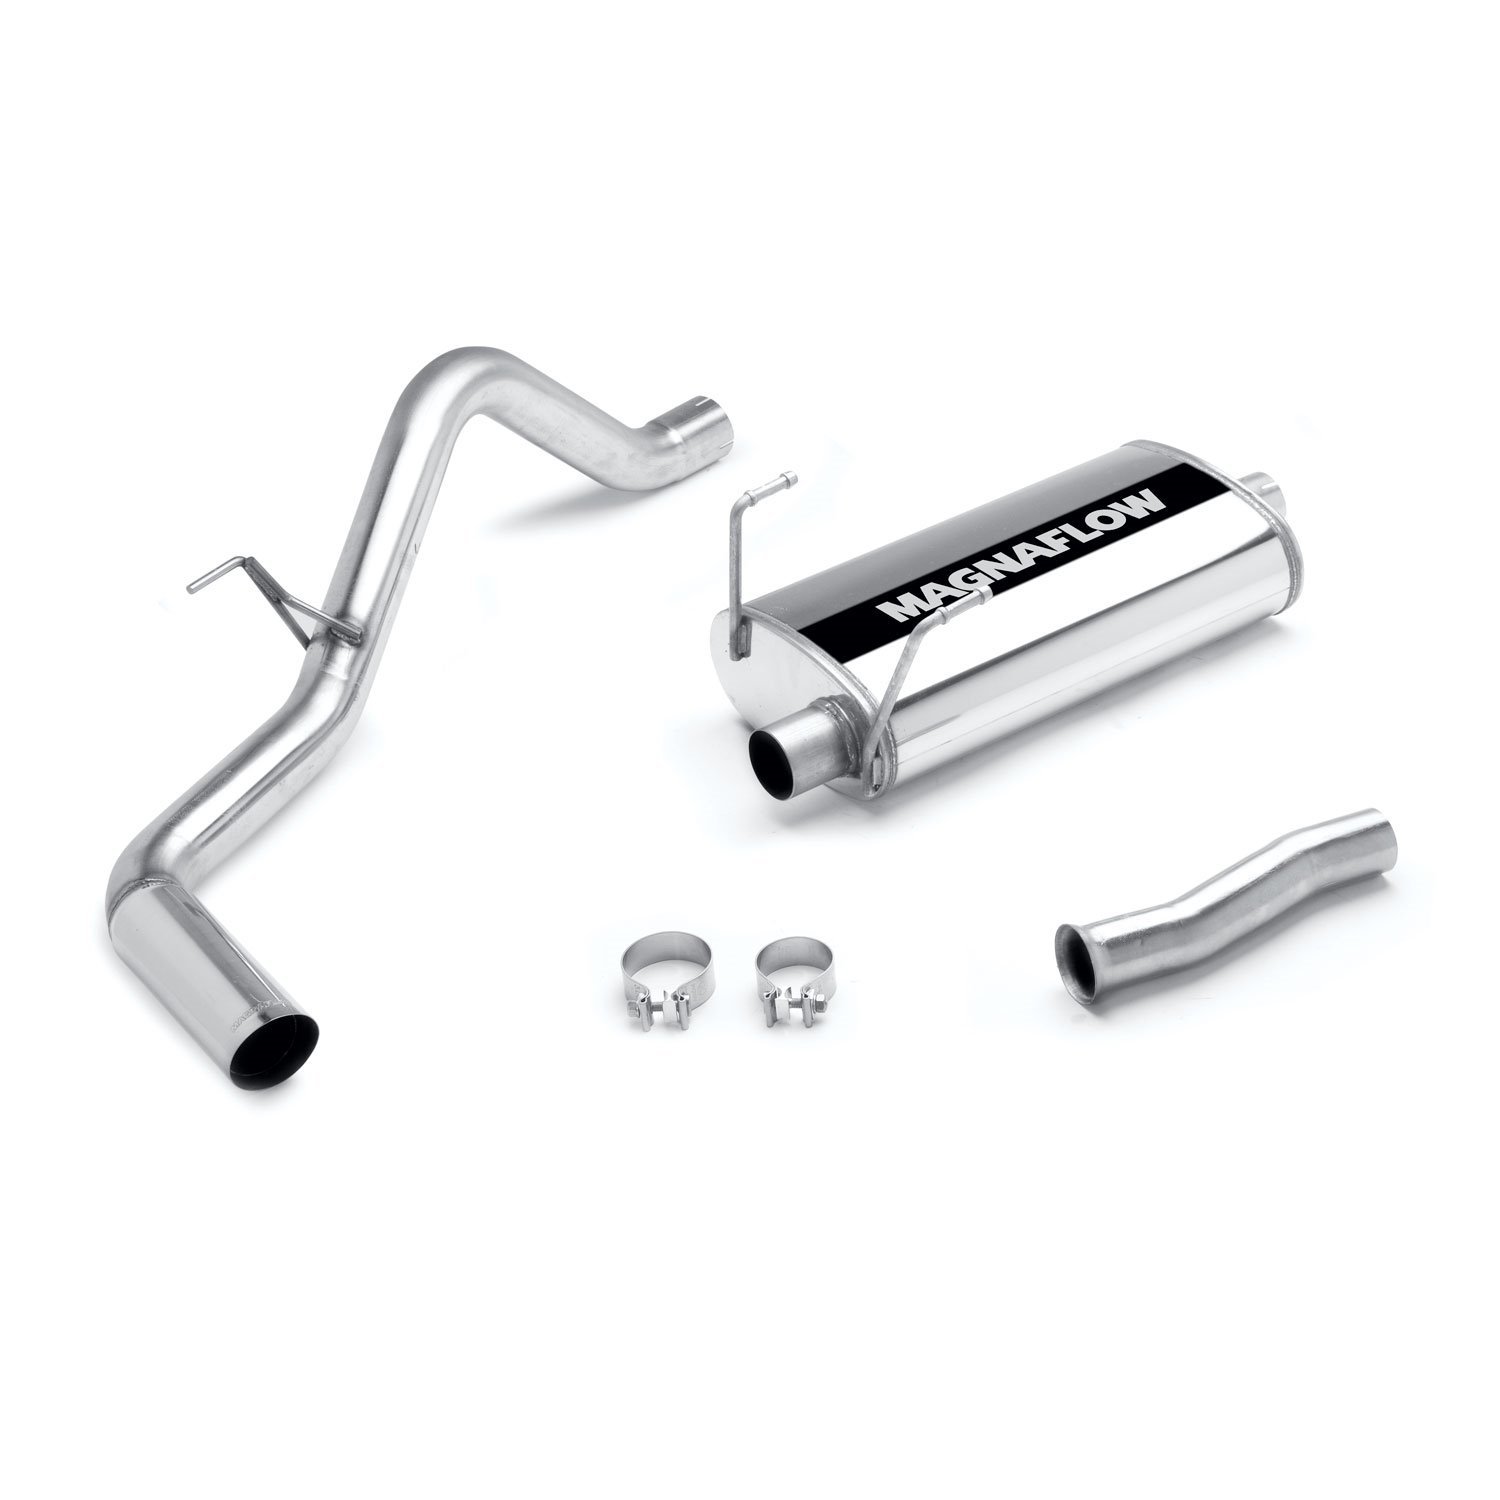 MF Series Cat-Back Exhaust System 2000-06 Tundra 3.4L/4.7L ( More info for Cab/Bed)